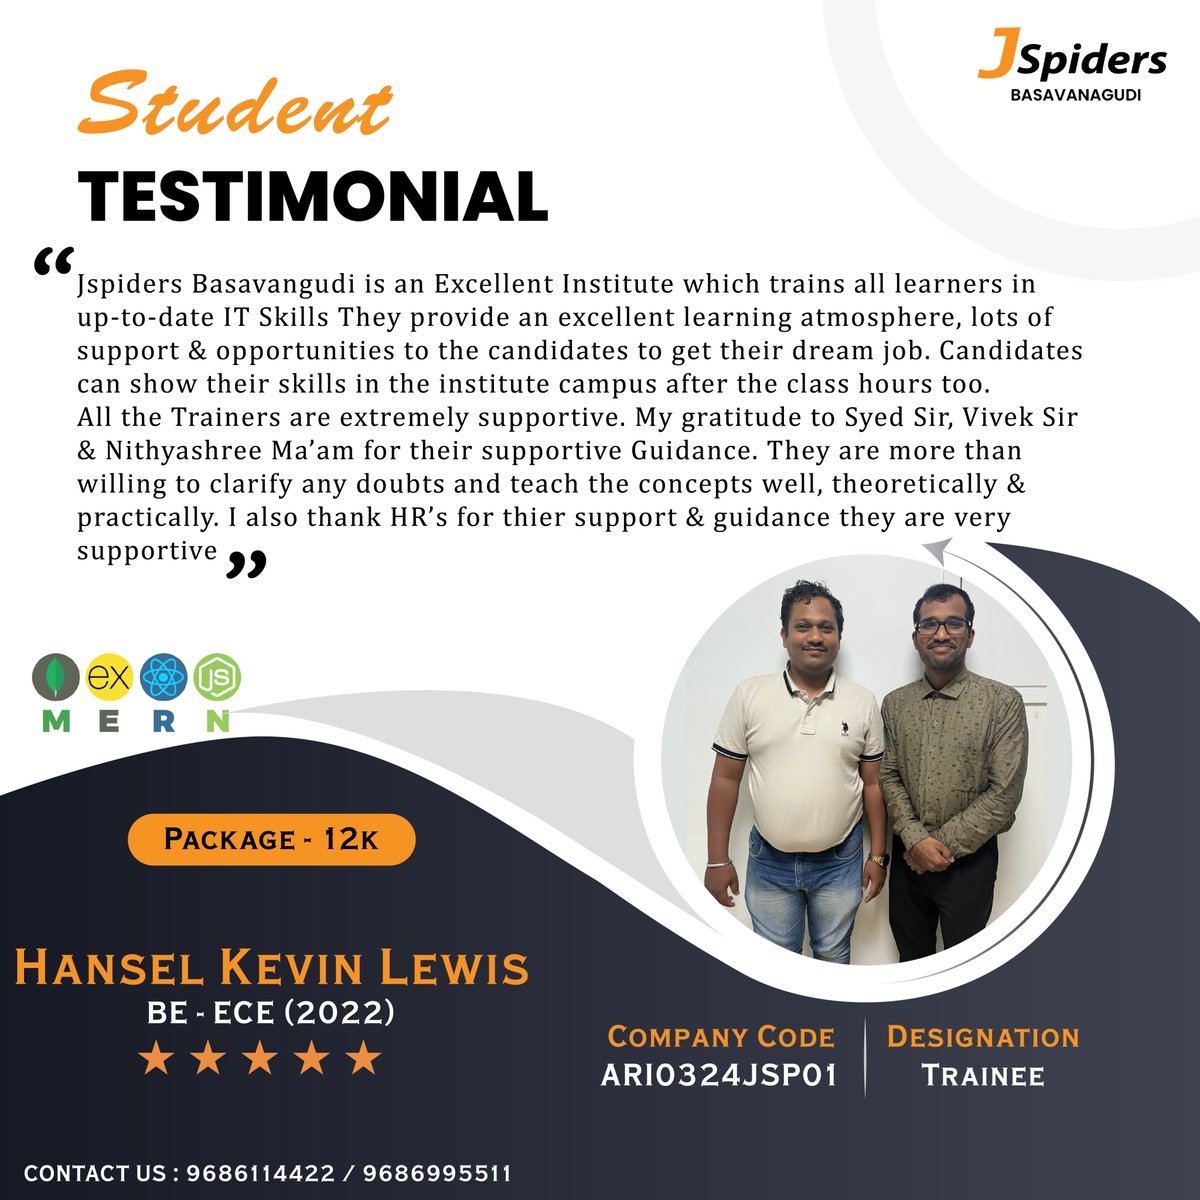 🎉That's wonderful! Congratulations to Hansel on his placement. It's always great to hear about someone achieving their goals.🎉
#jspiders
#JobSuccess
#NewBeginnings
#CareerJourney
#CongratulationsSonu
#DreamJobAchieved
#CelebratingSuccess
#CareerMilestone
#SuccessStoryStarts